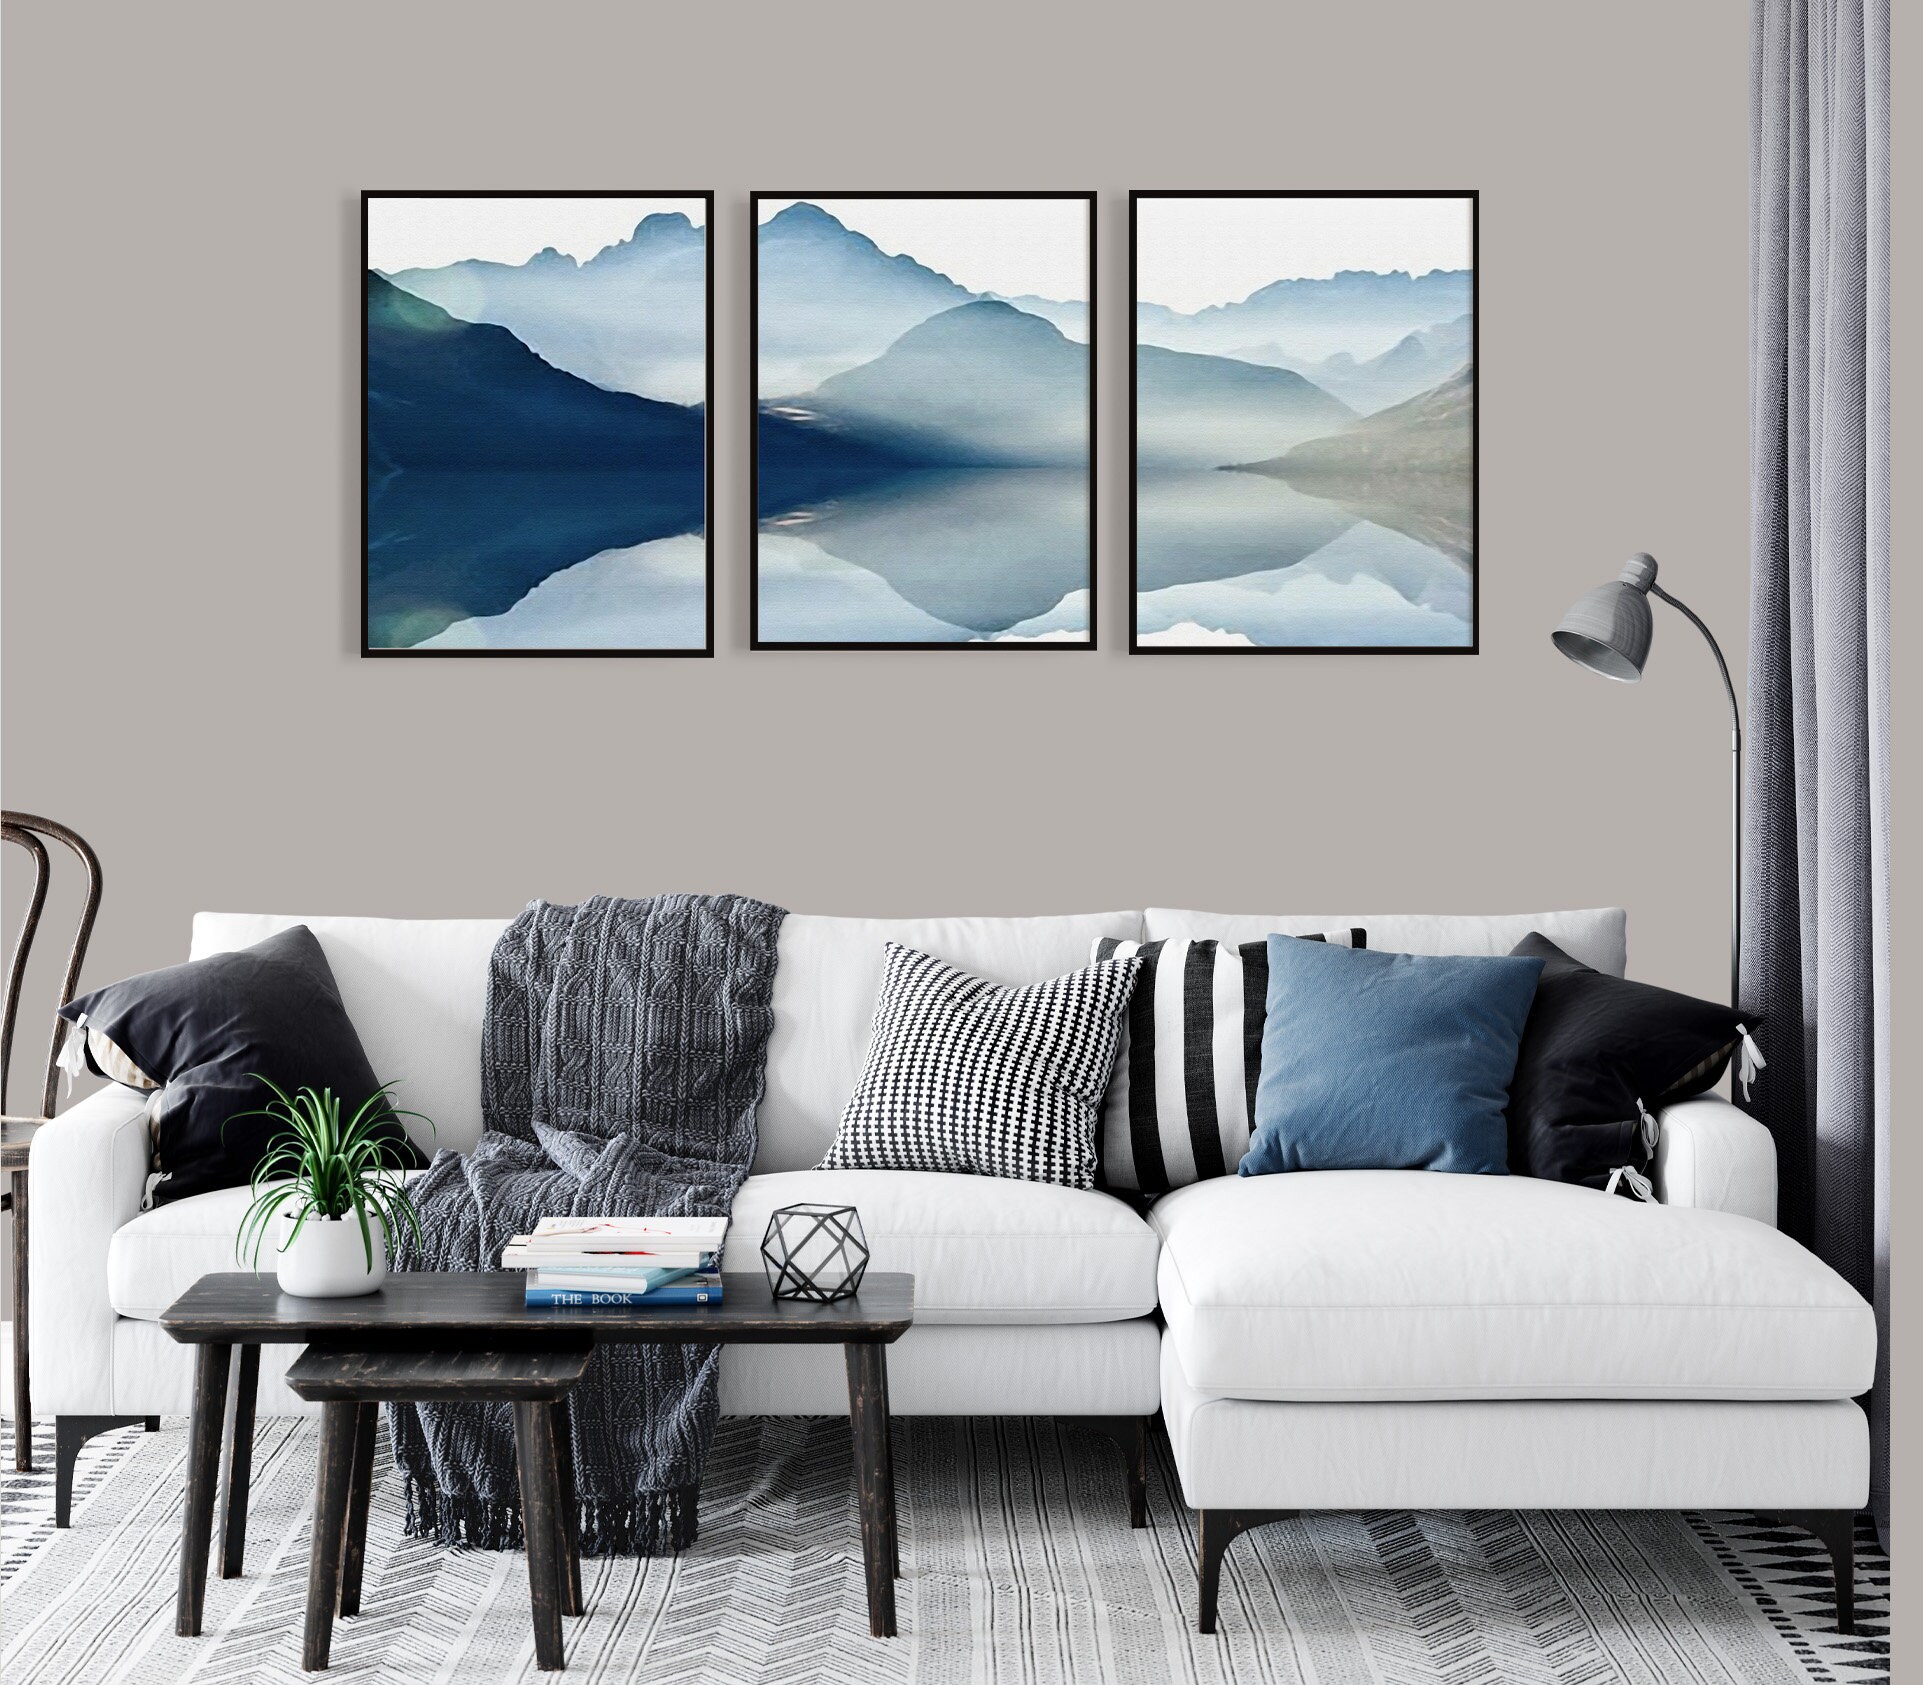 Set of 3 instant digital download wall art. Abstract landscape | Etsy